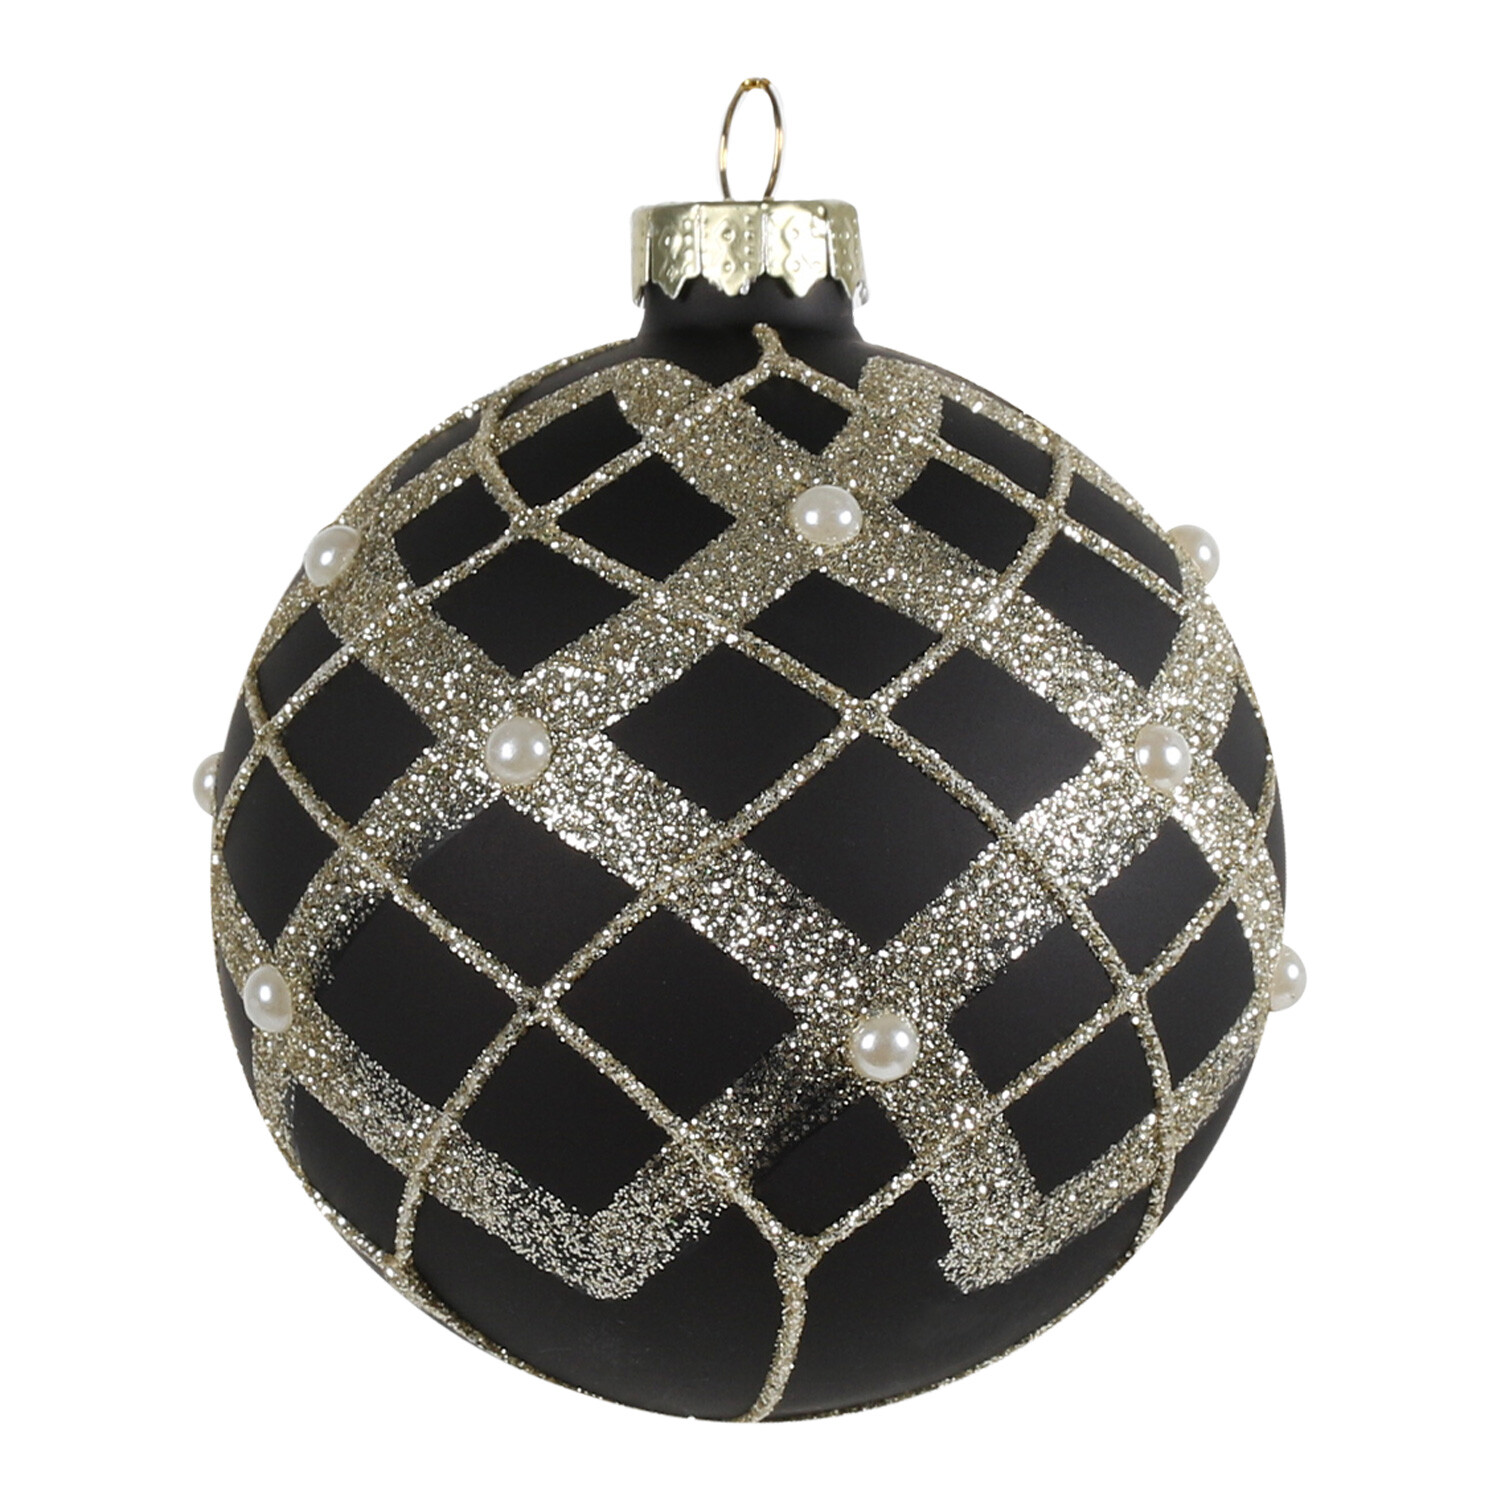 Single Chic Noir Black and Gold Glitter Design Bauble in Assorted styles Image 3